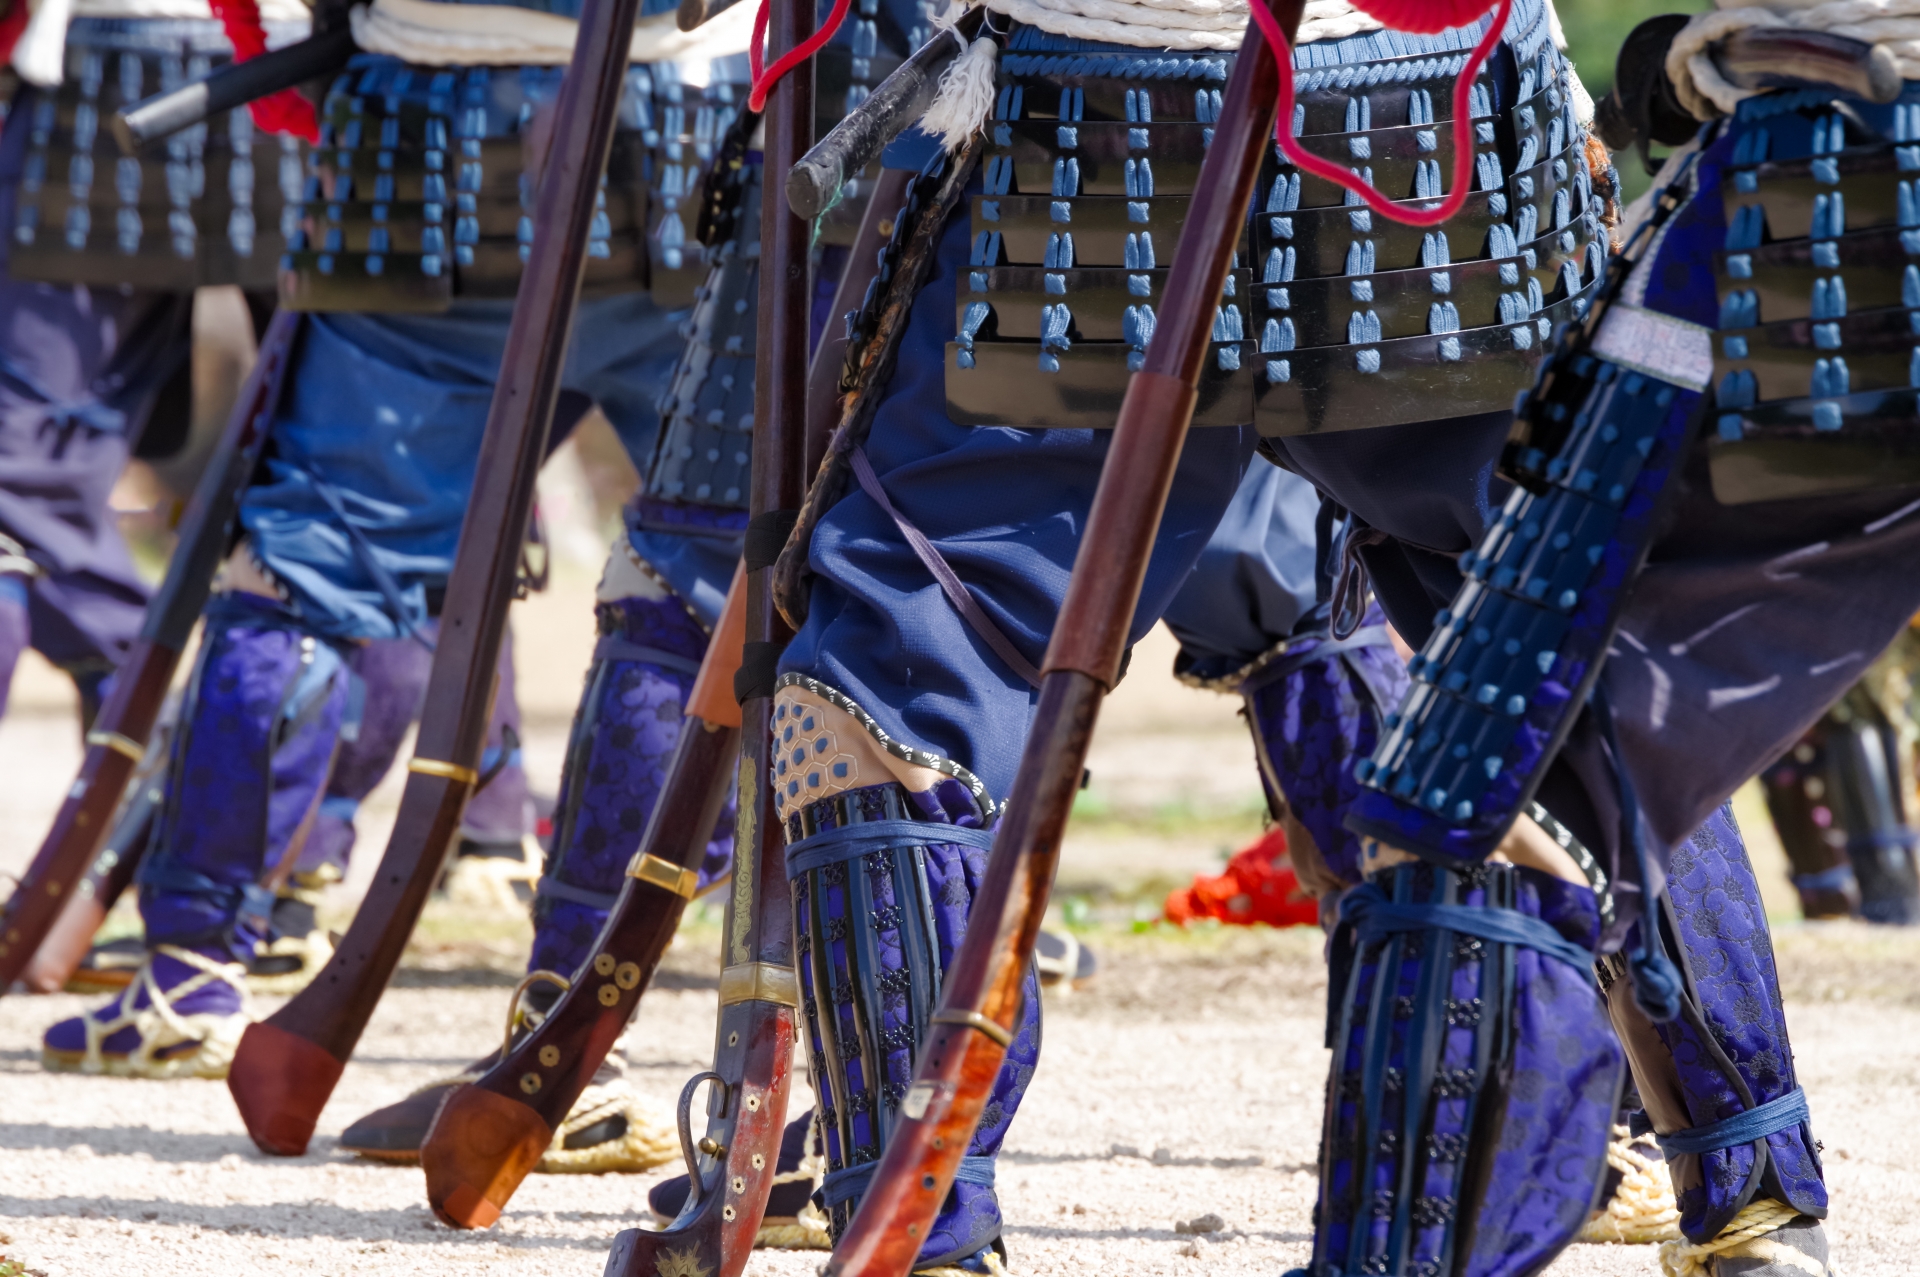 Some samurai warriors are lined up with rifles.